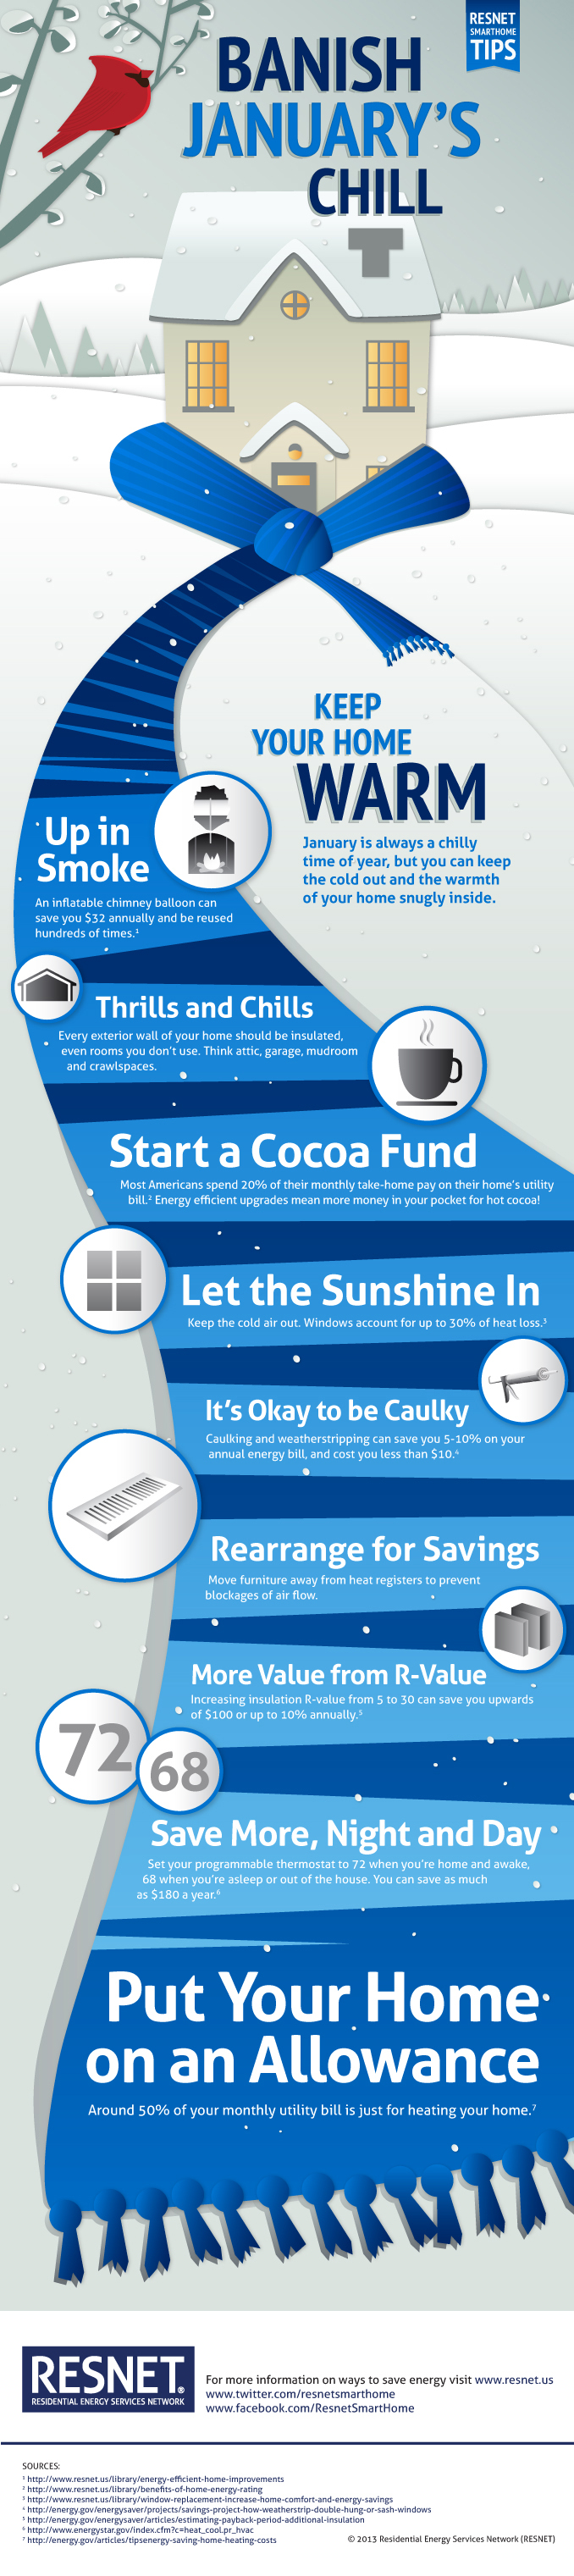 This infographic offers great tips on what you can do to keep your home warm in winter.